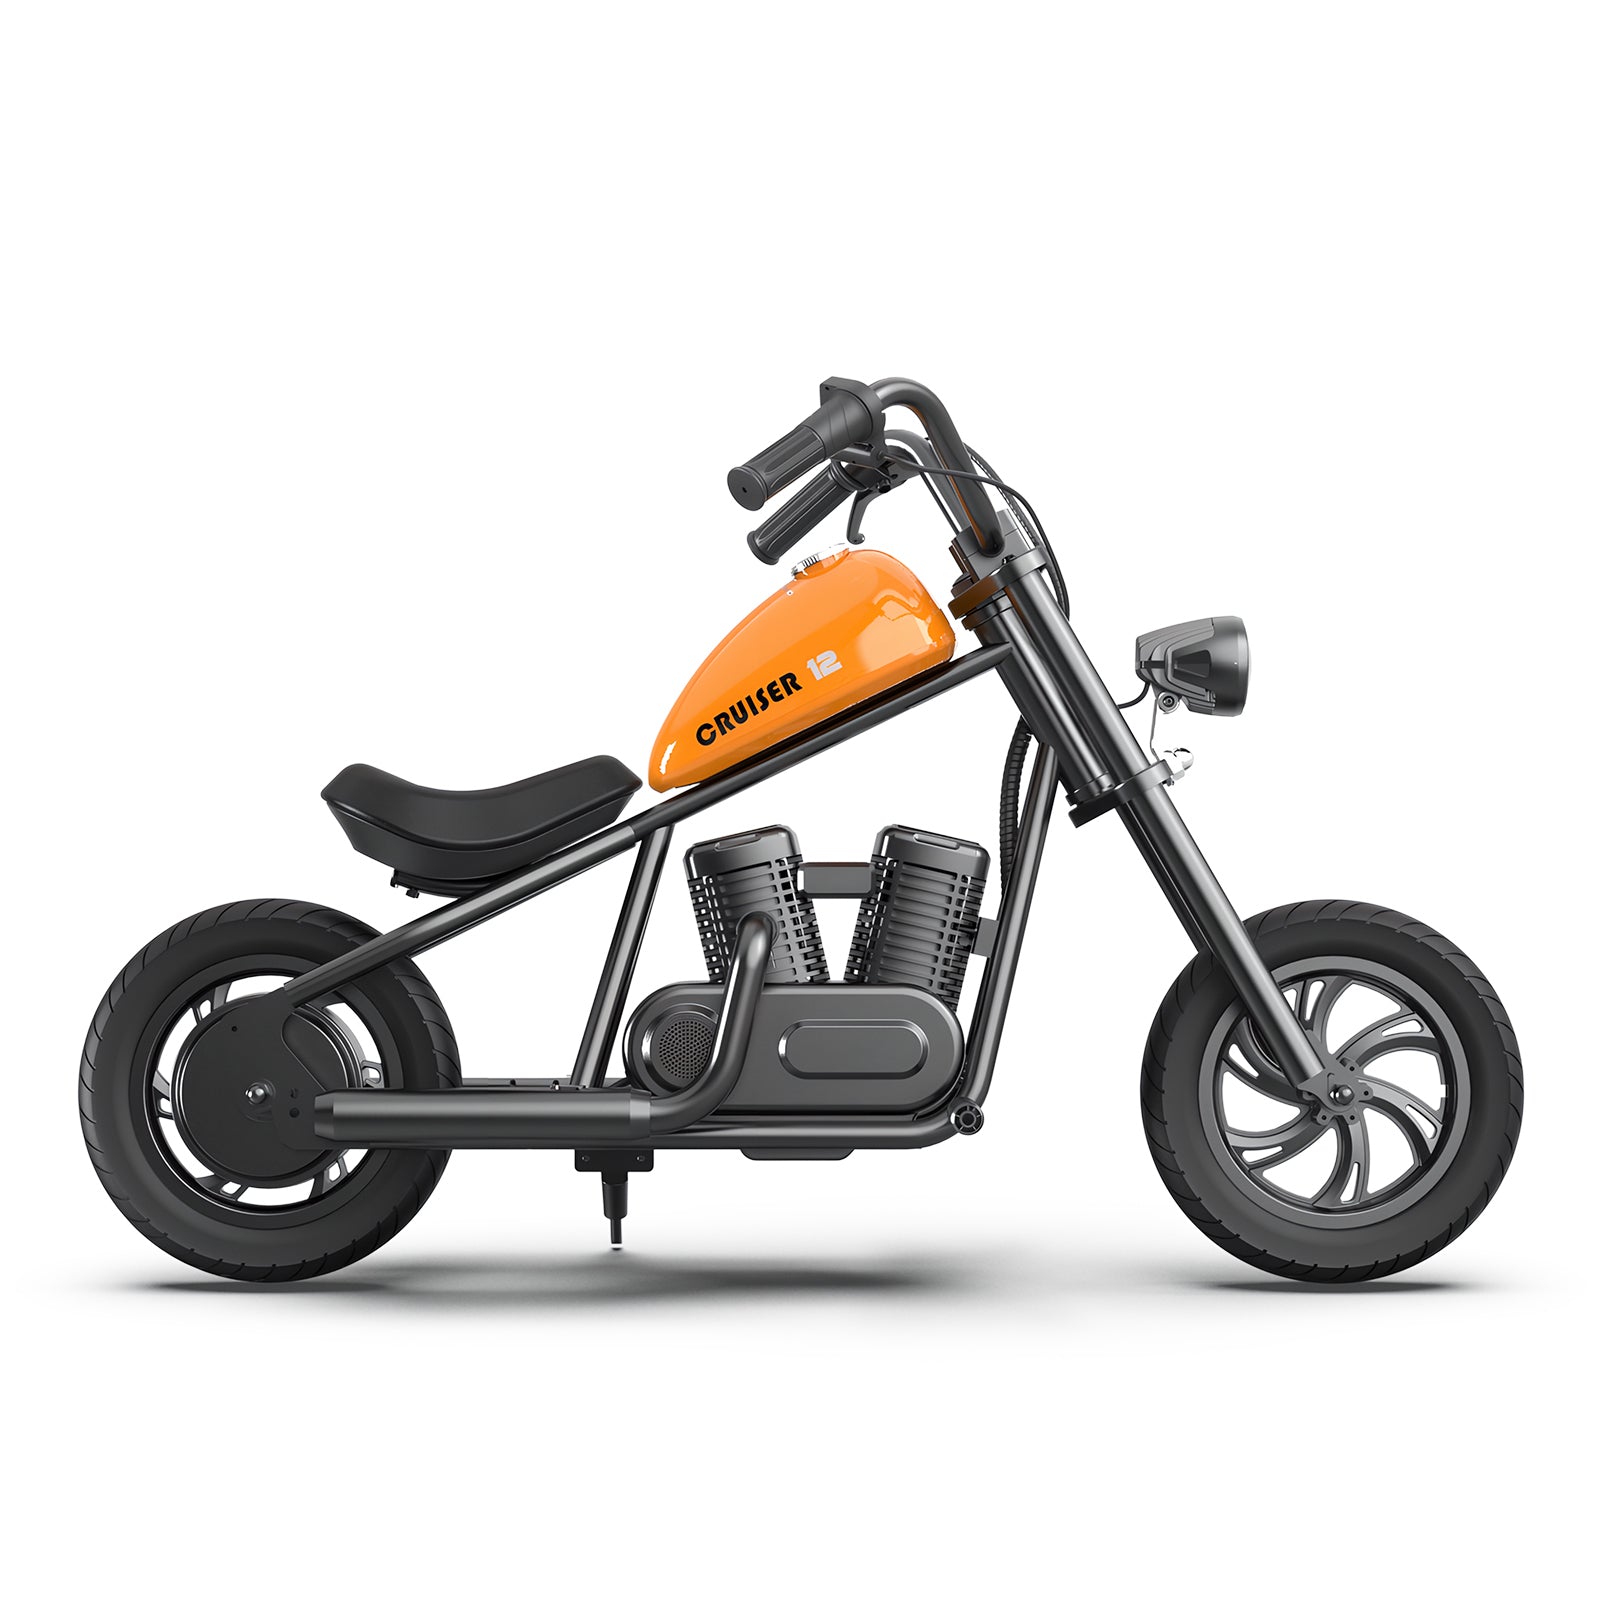 Electric Motorcycle for Kids - HYPER GOGO Cruiser 12